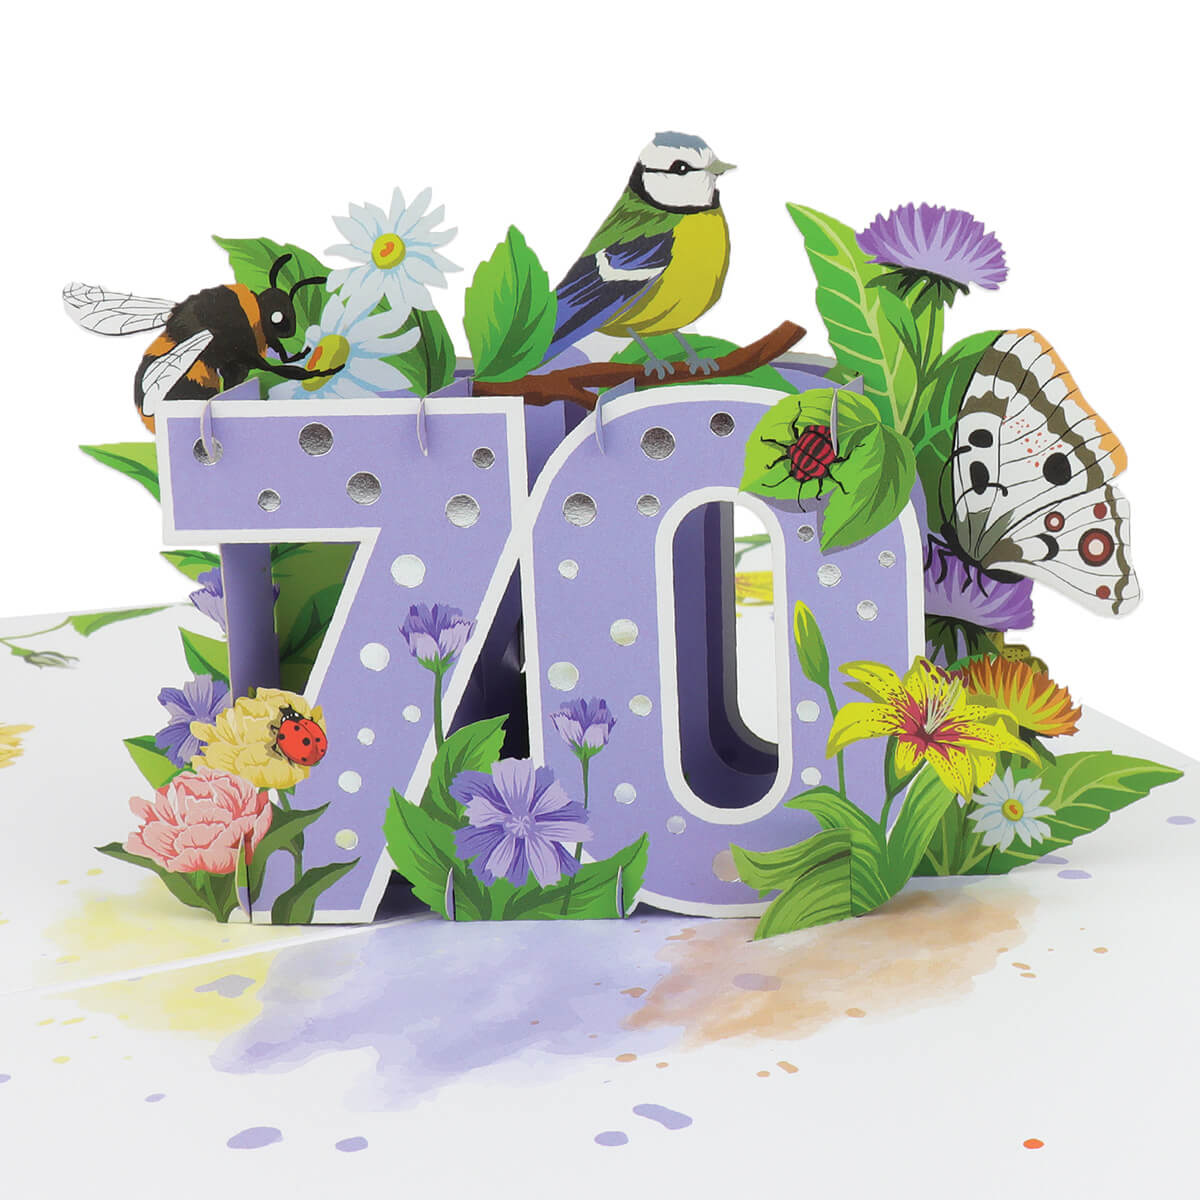 close up image of 70th birthday pop up card, soft lilac with foiled silver dots on the 3D pop up 70, surrounded by butterflies, birds and insects. Inspiration of the great british countryside